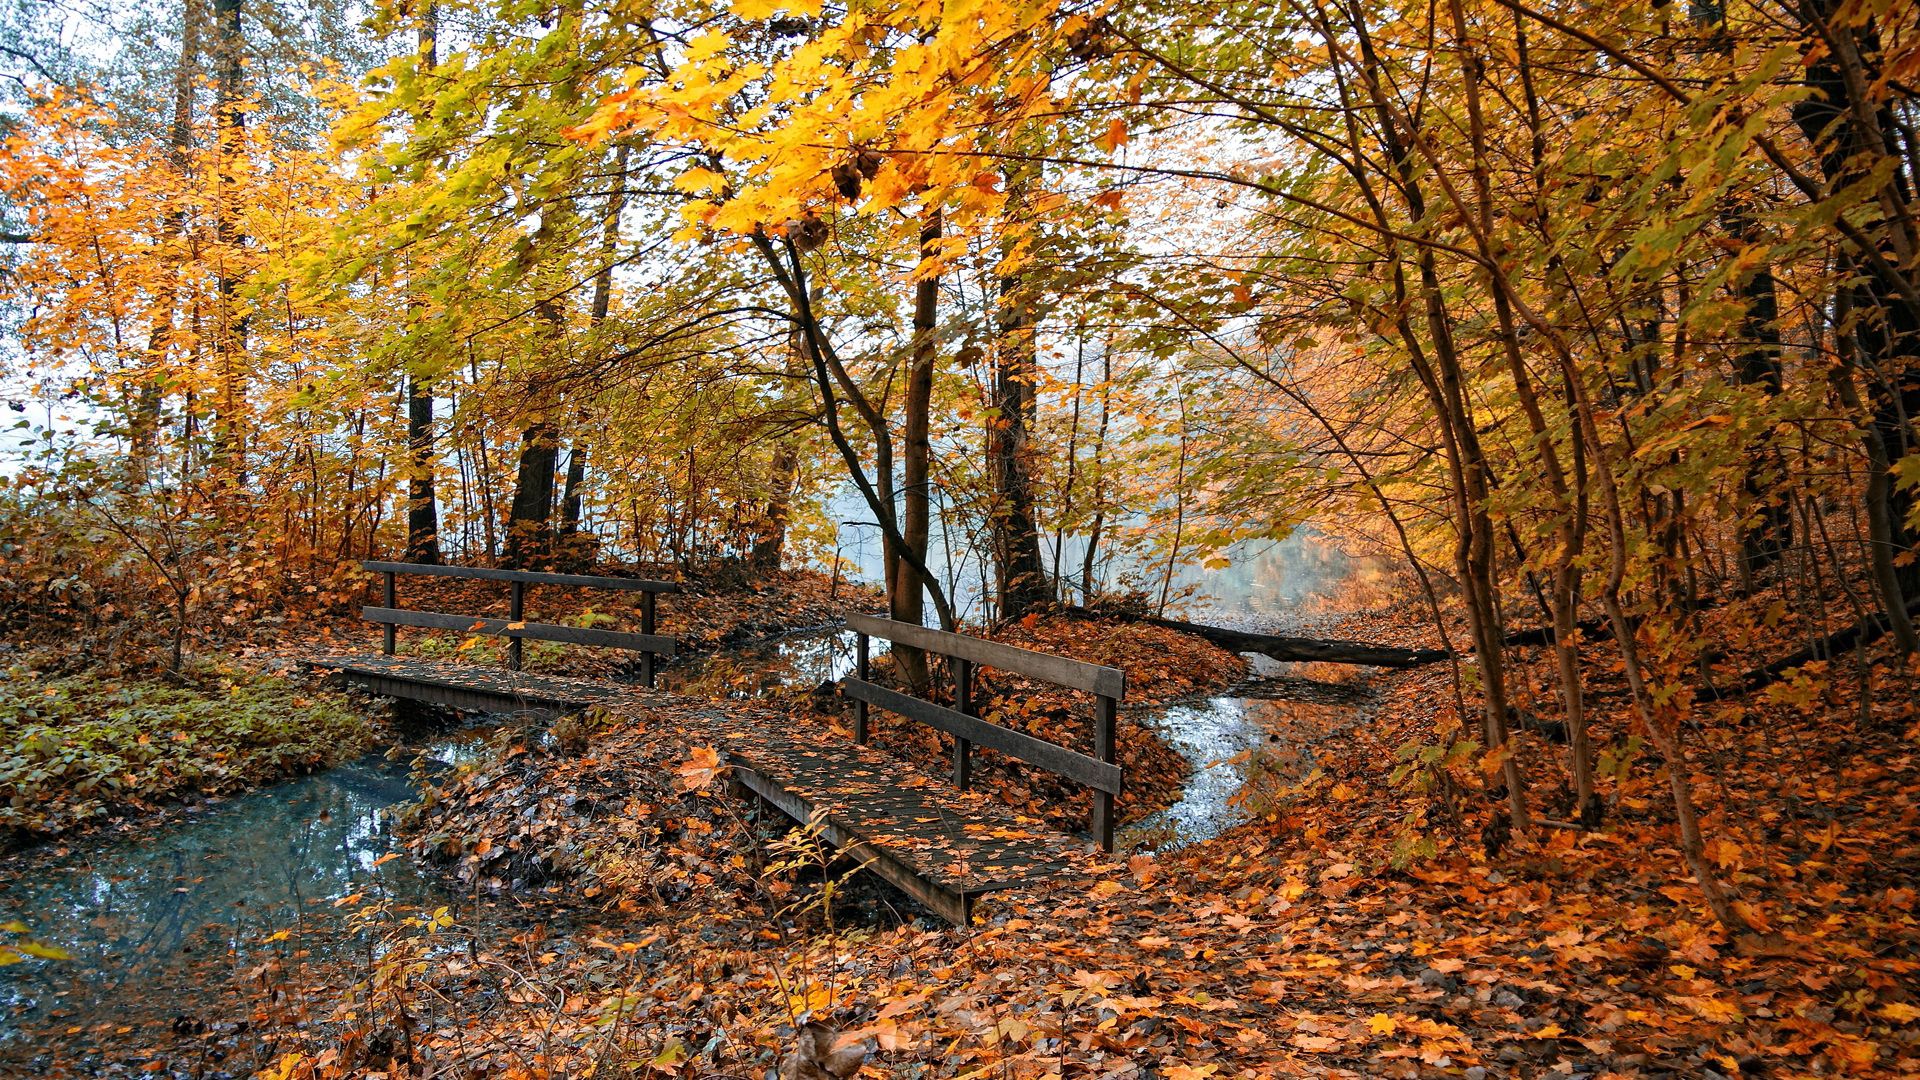 leaves, forest, trees, nature, bridges, yellow, autumn, water